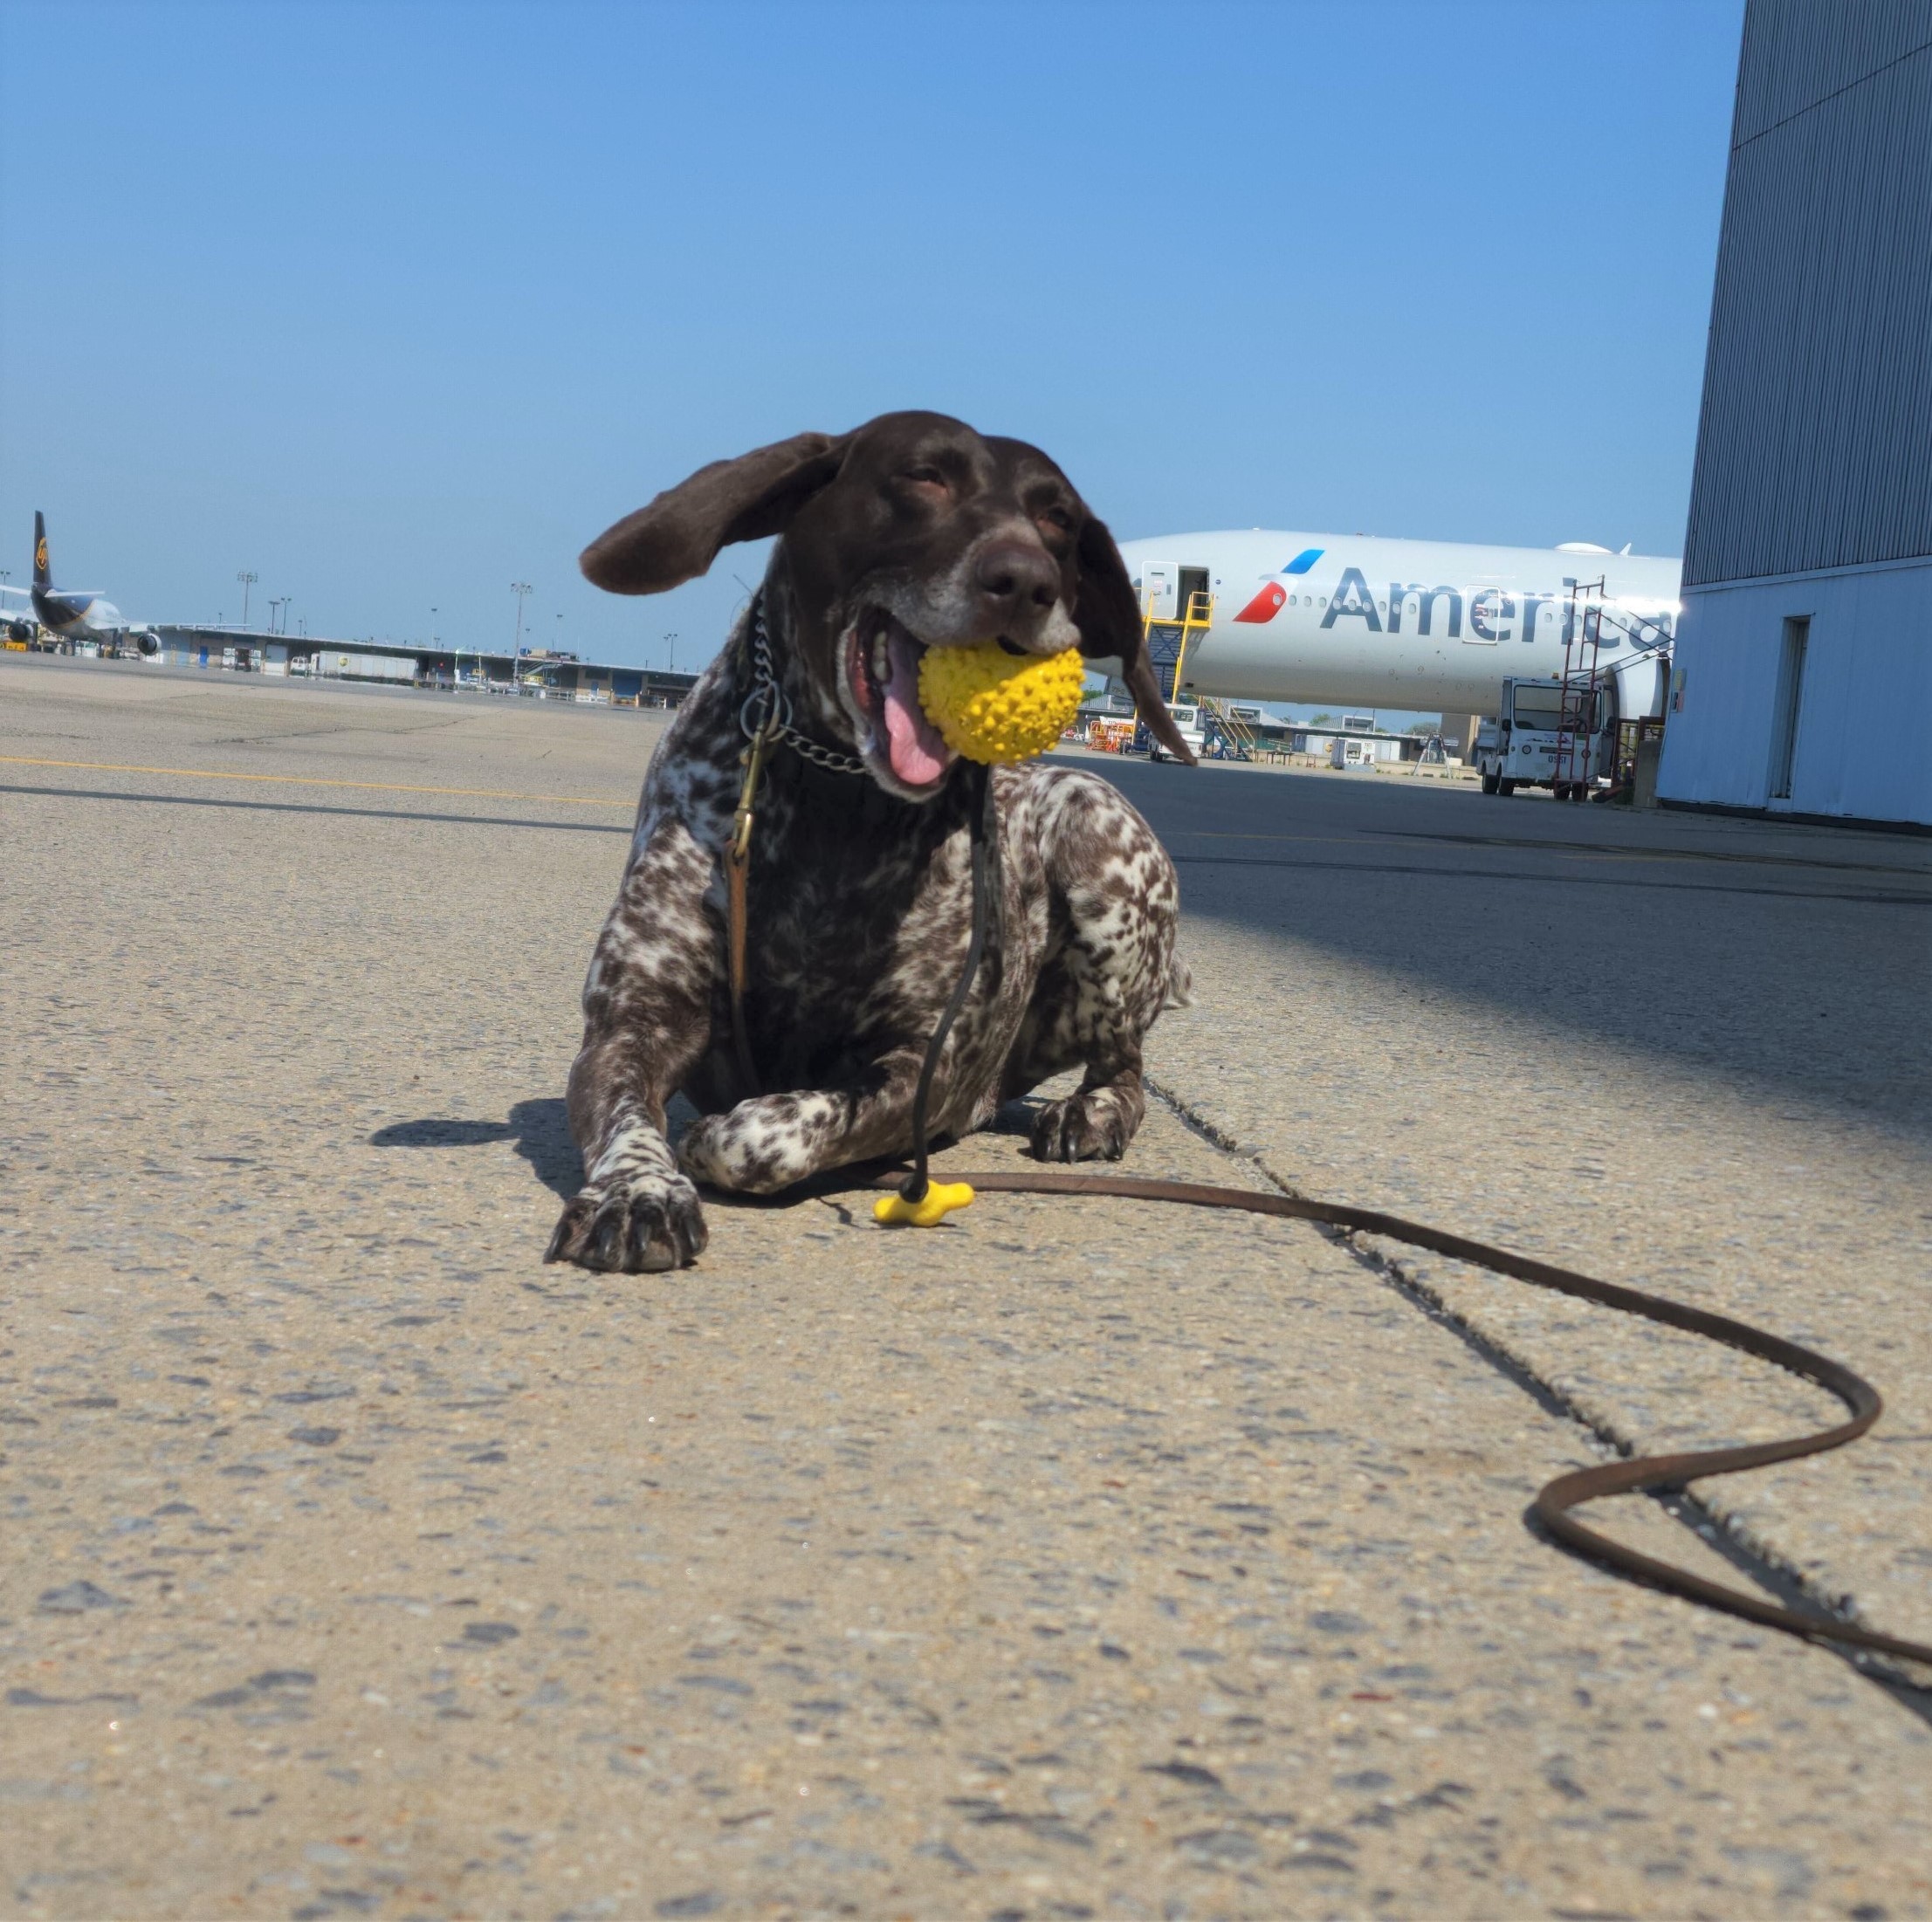 TSA explosives detection canine Ben is usually screening passengers at JFK International Airport. Here he takes a much-deserved break from screening passengers. (TSA photo)